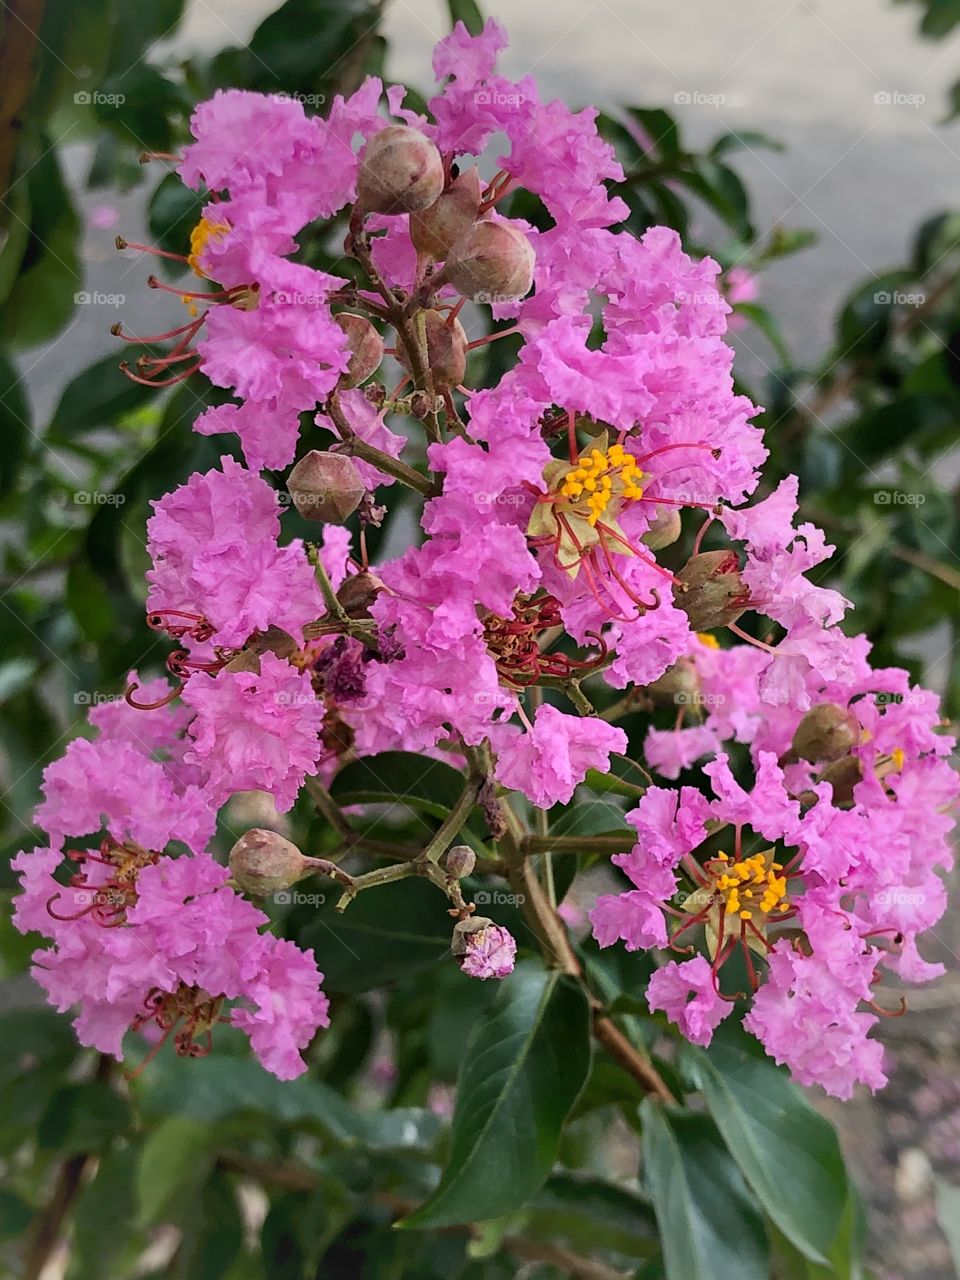 Lagerstroemia indica, also know as crape myrtle. The pink crape myrtle flower or crepeflower.